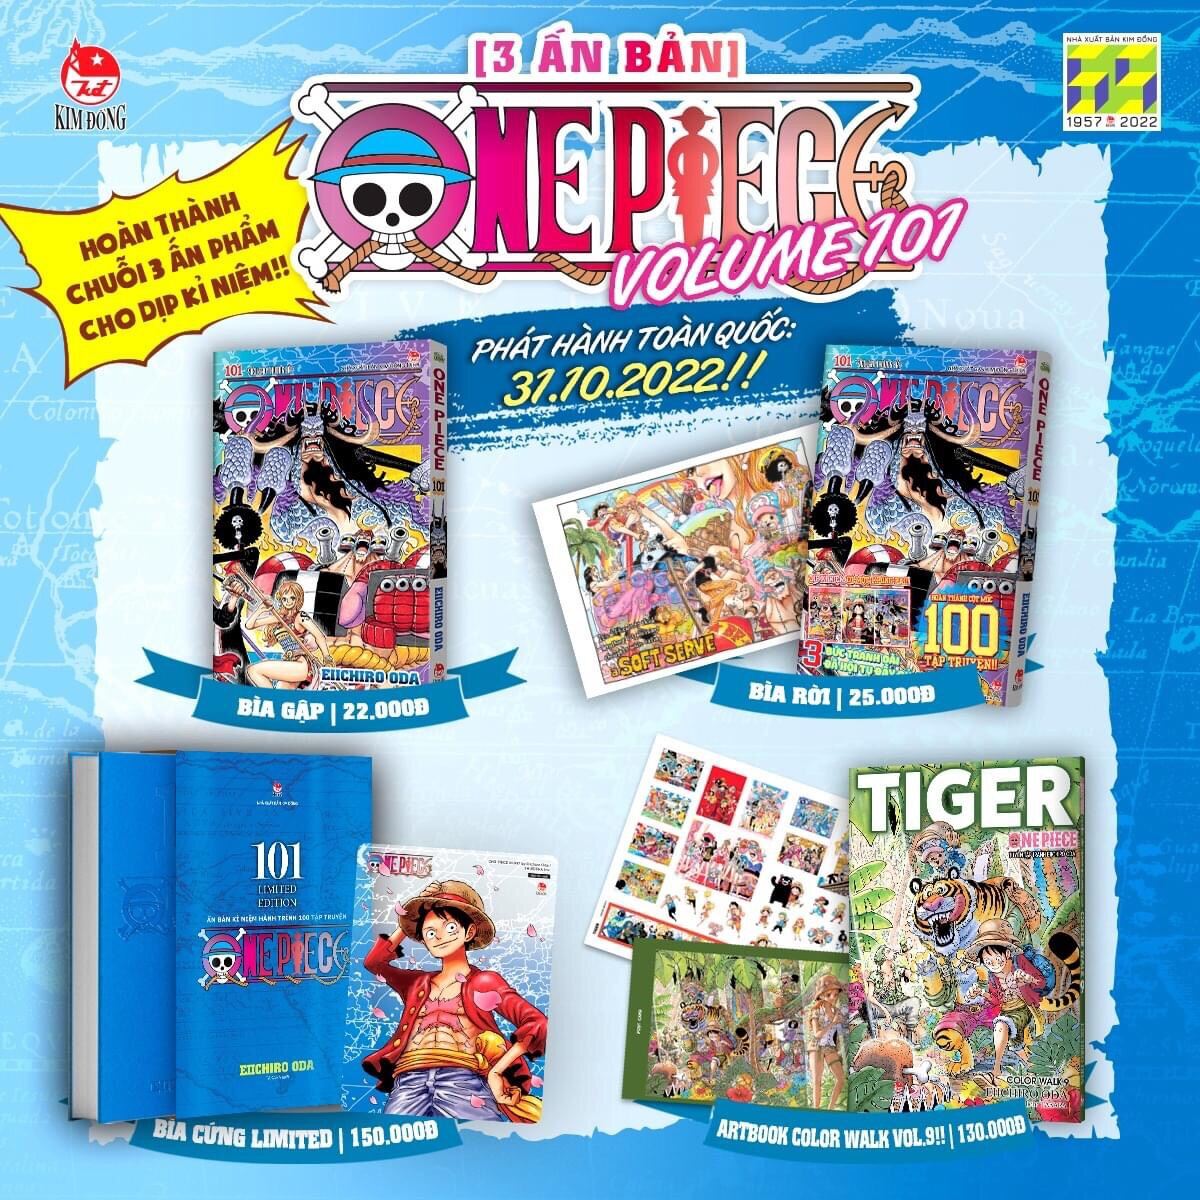 One piece 101 limited